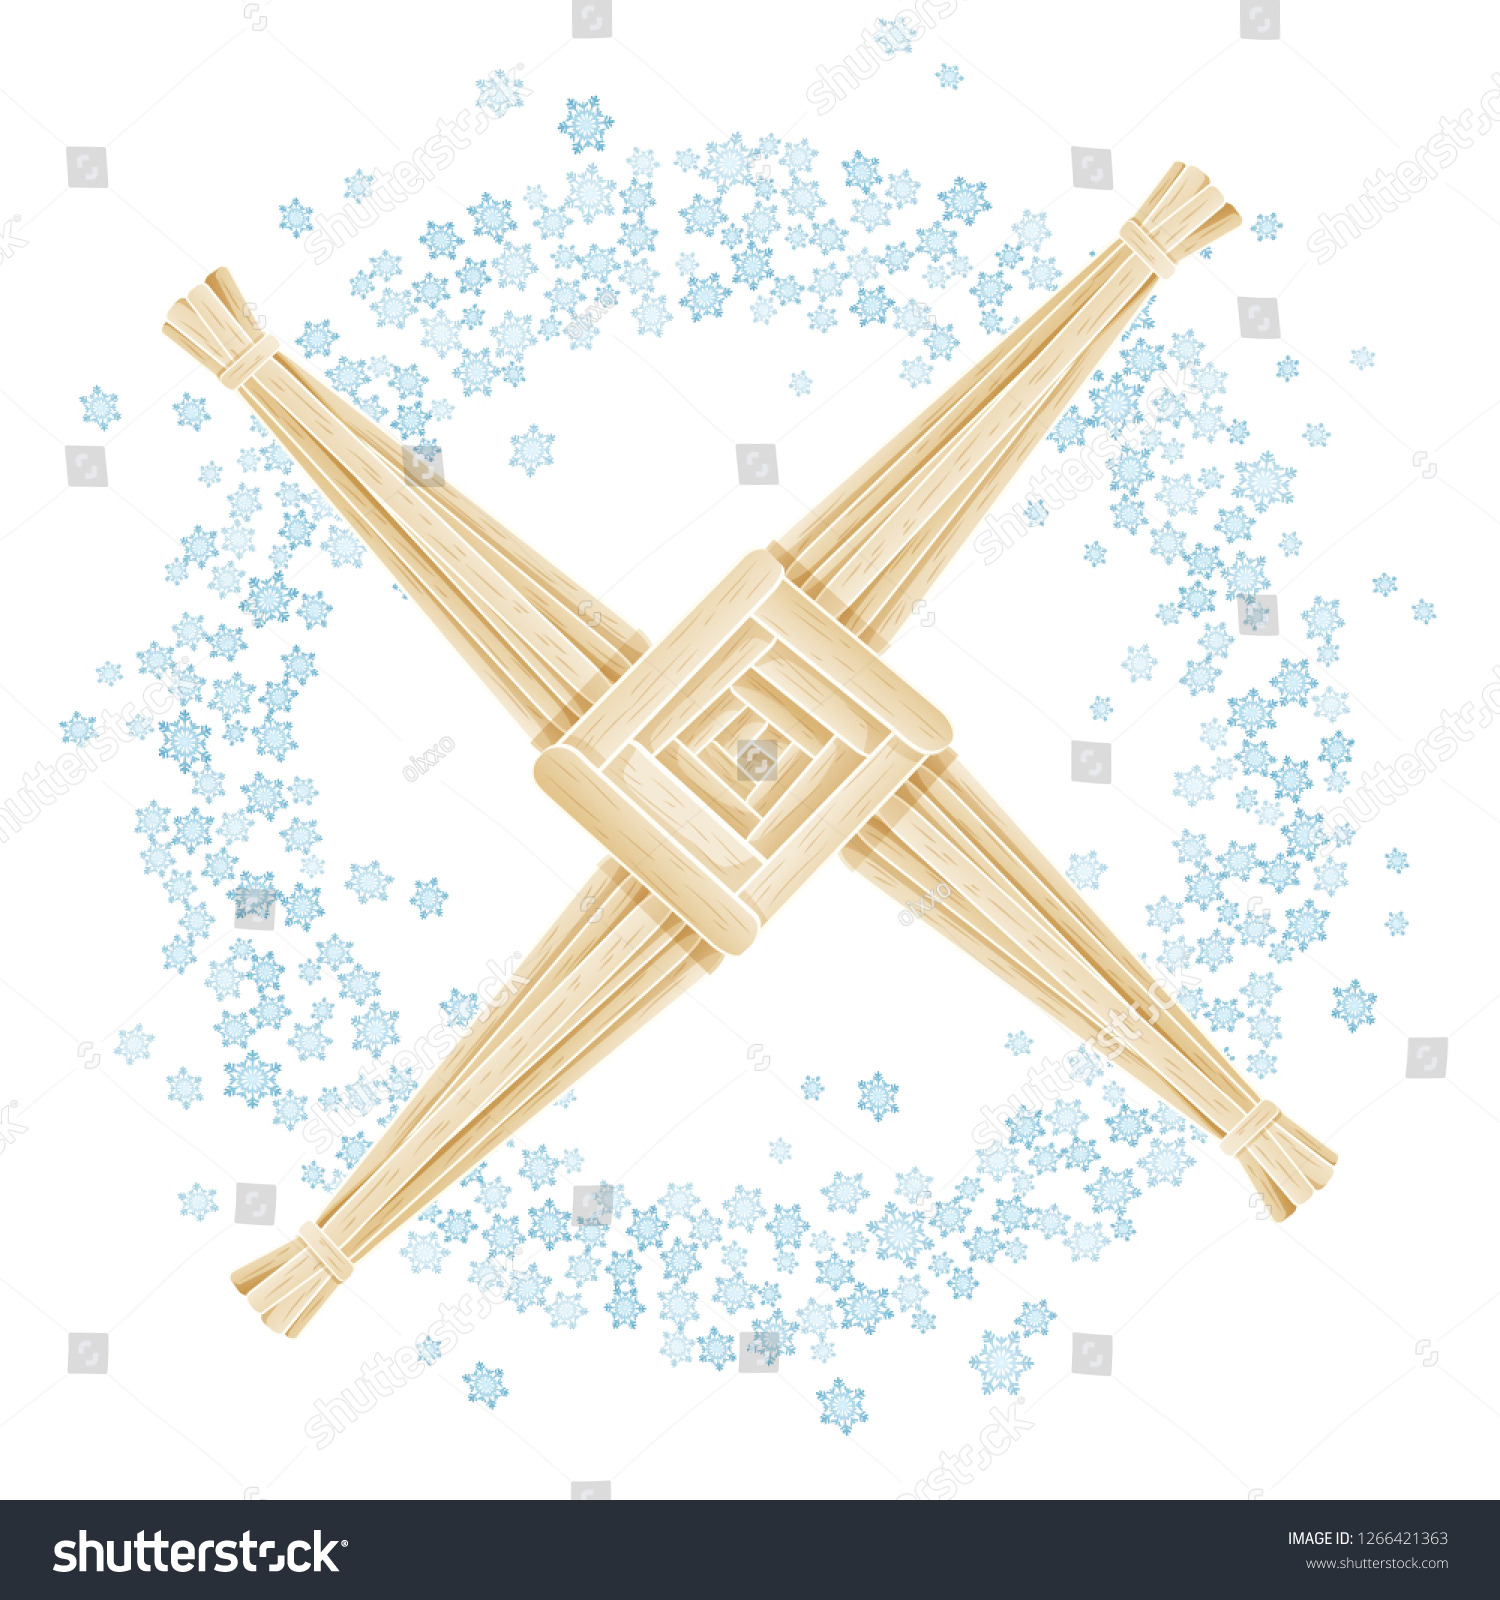 SVG of Brigid's Cross in a wreath of snowflakes. Imbolc pagan holiday template Vector postcard svg